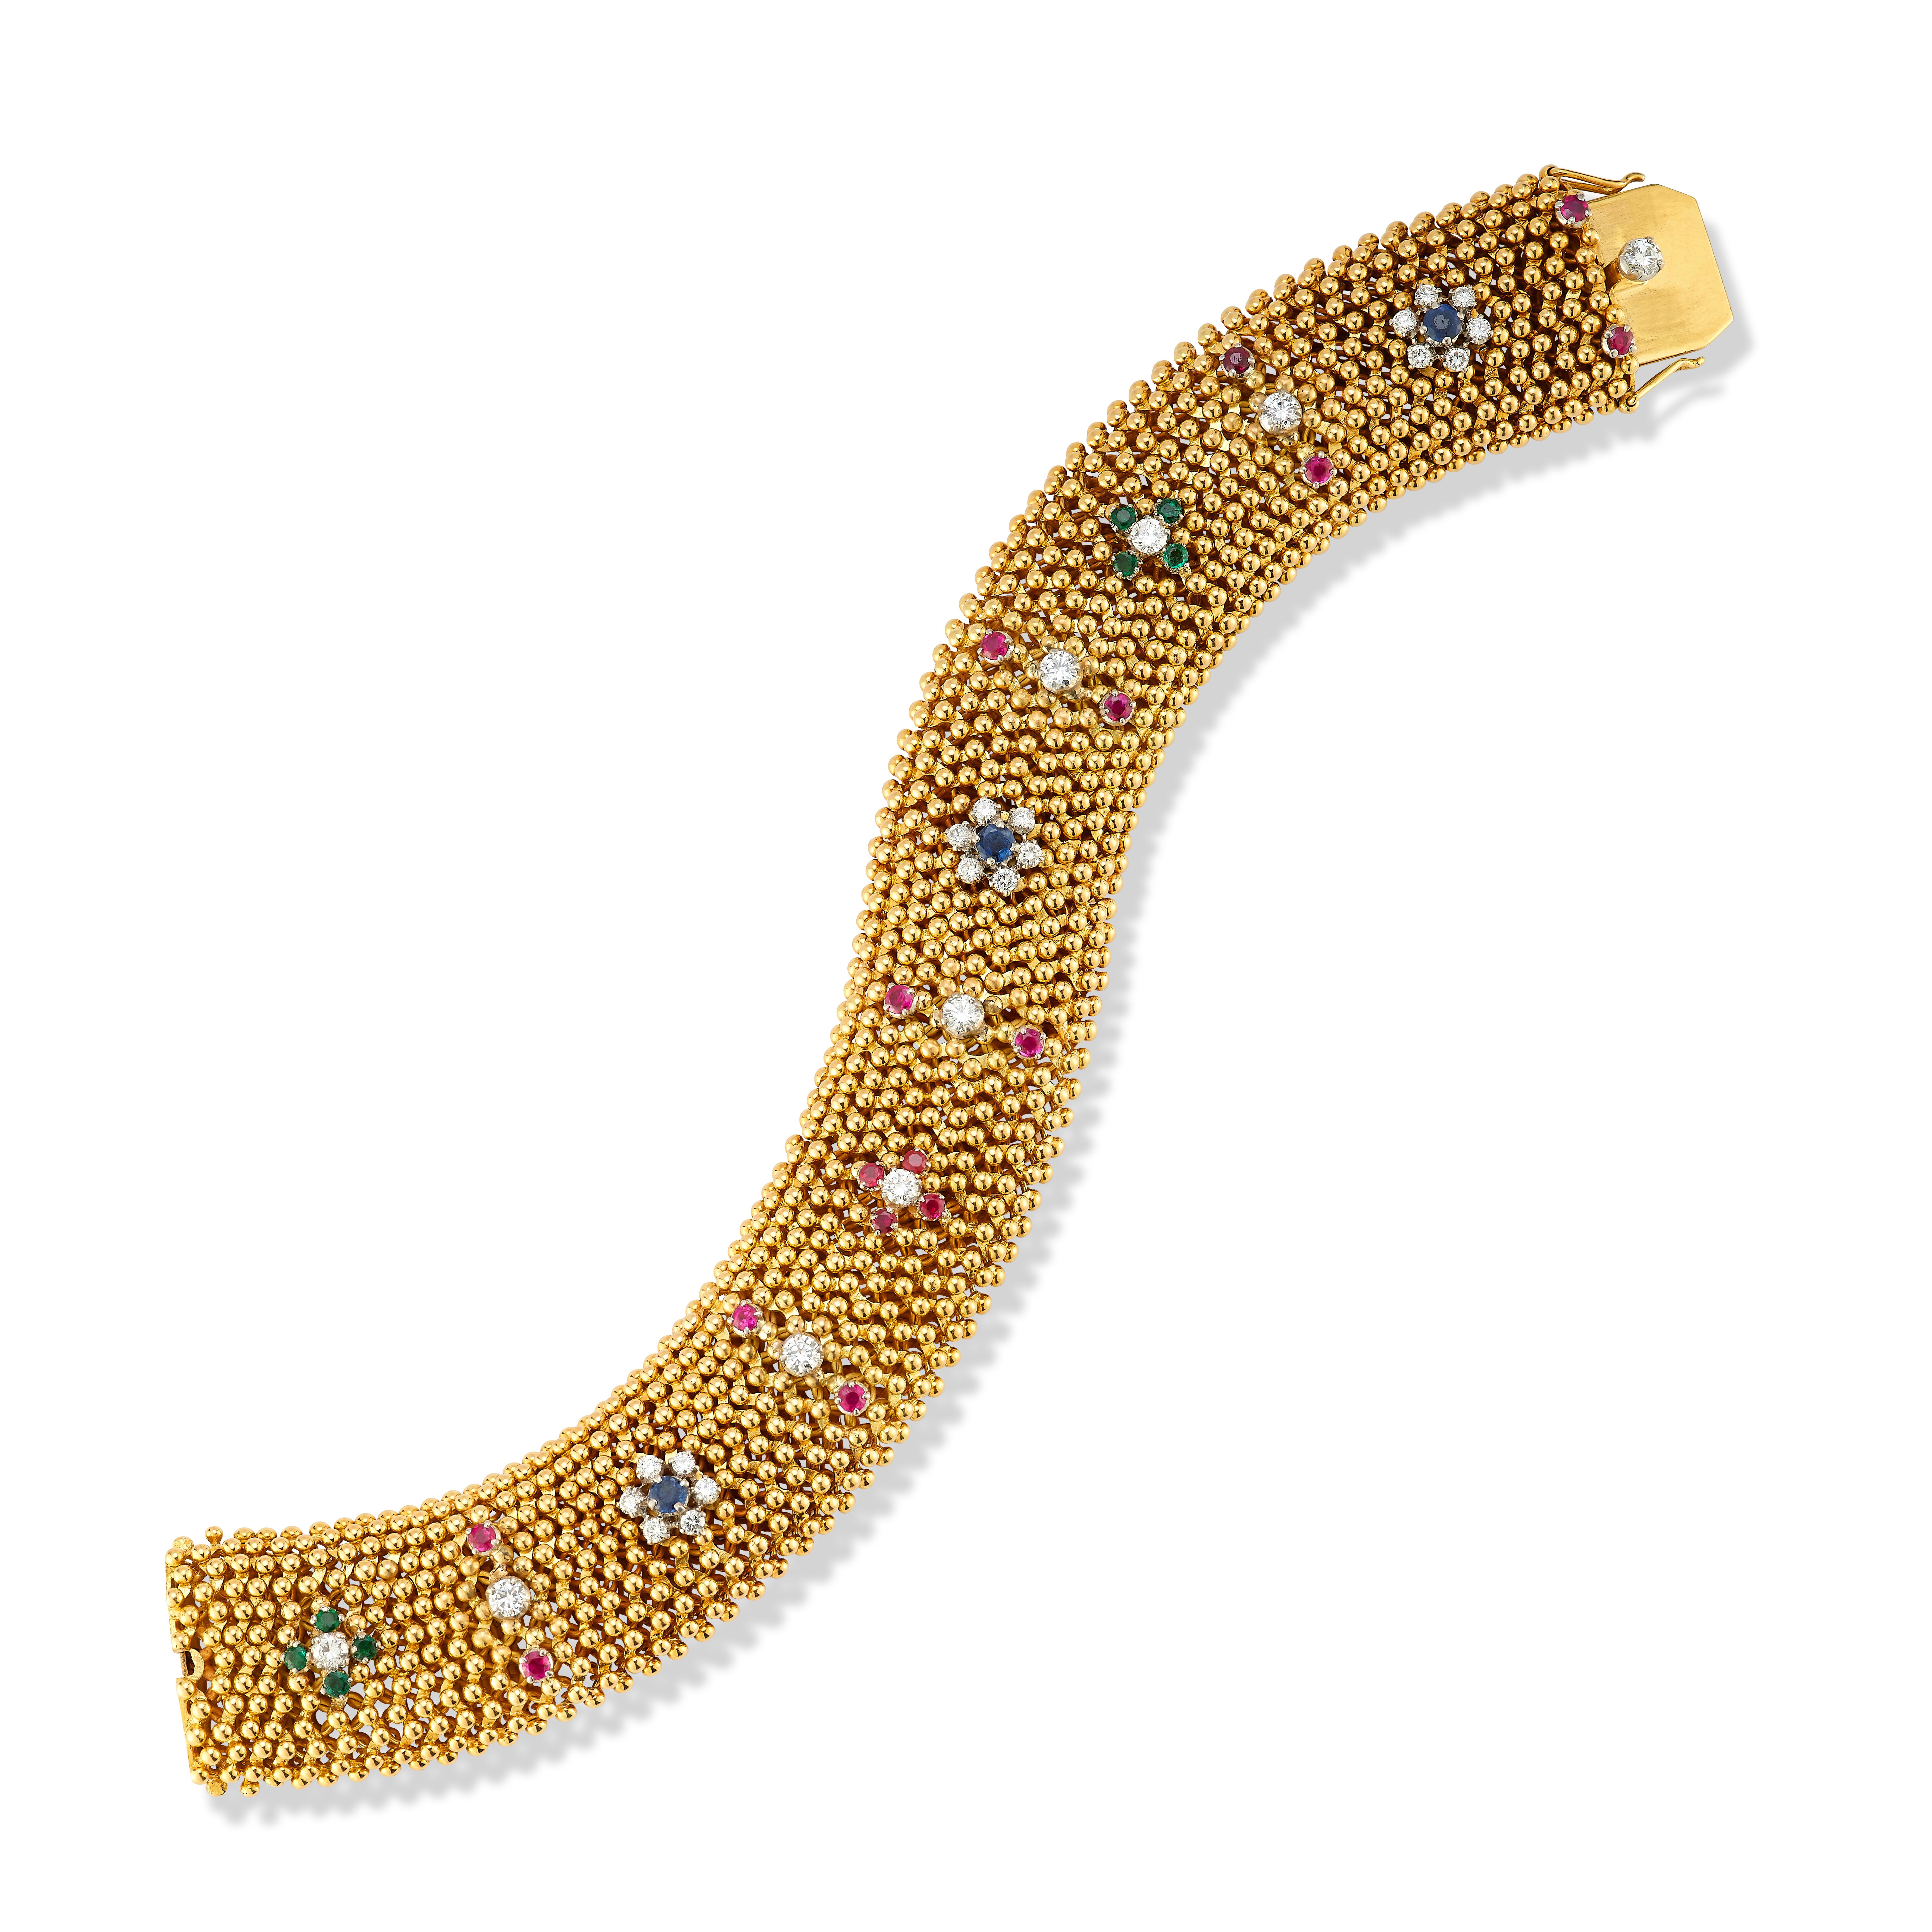 Bulgari Multi Gem Gold Bracelet

An 18-karat yellow gold mesh bracelet set with round cut diamonds, rubies, emeralds, and sapphires in a repeating pattern

Signed Bvlgari
Stamped 750

Total Approximate Diamond Weight: 1.5 carats
Total Approximate